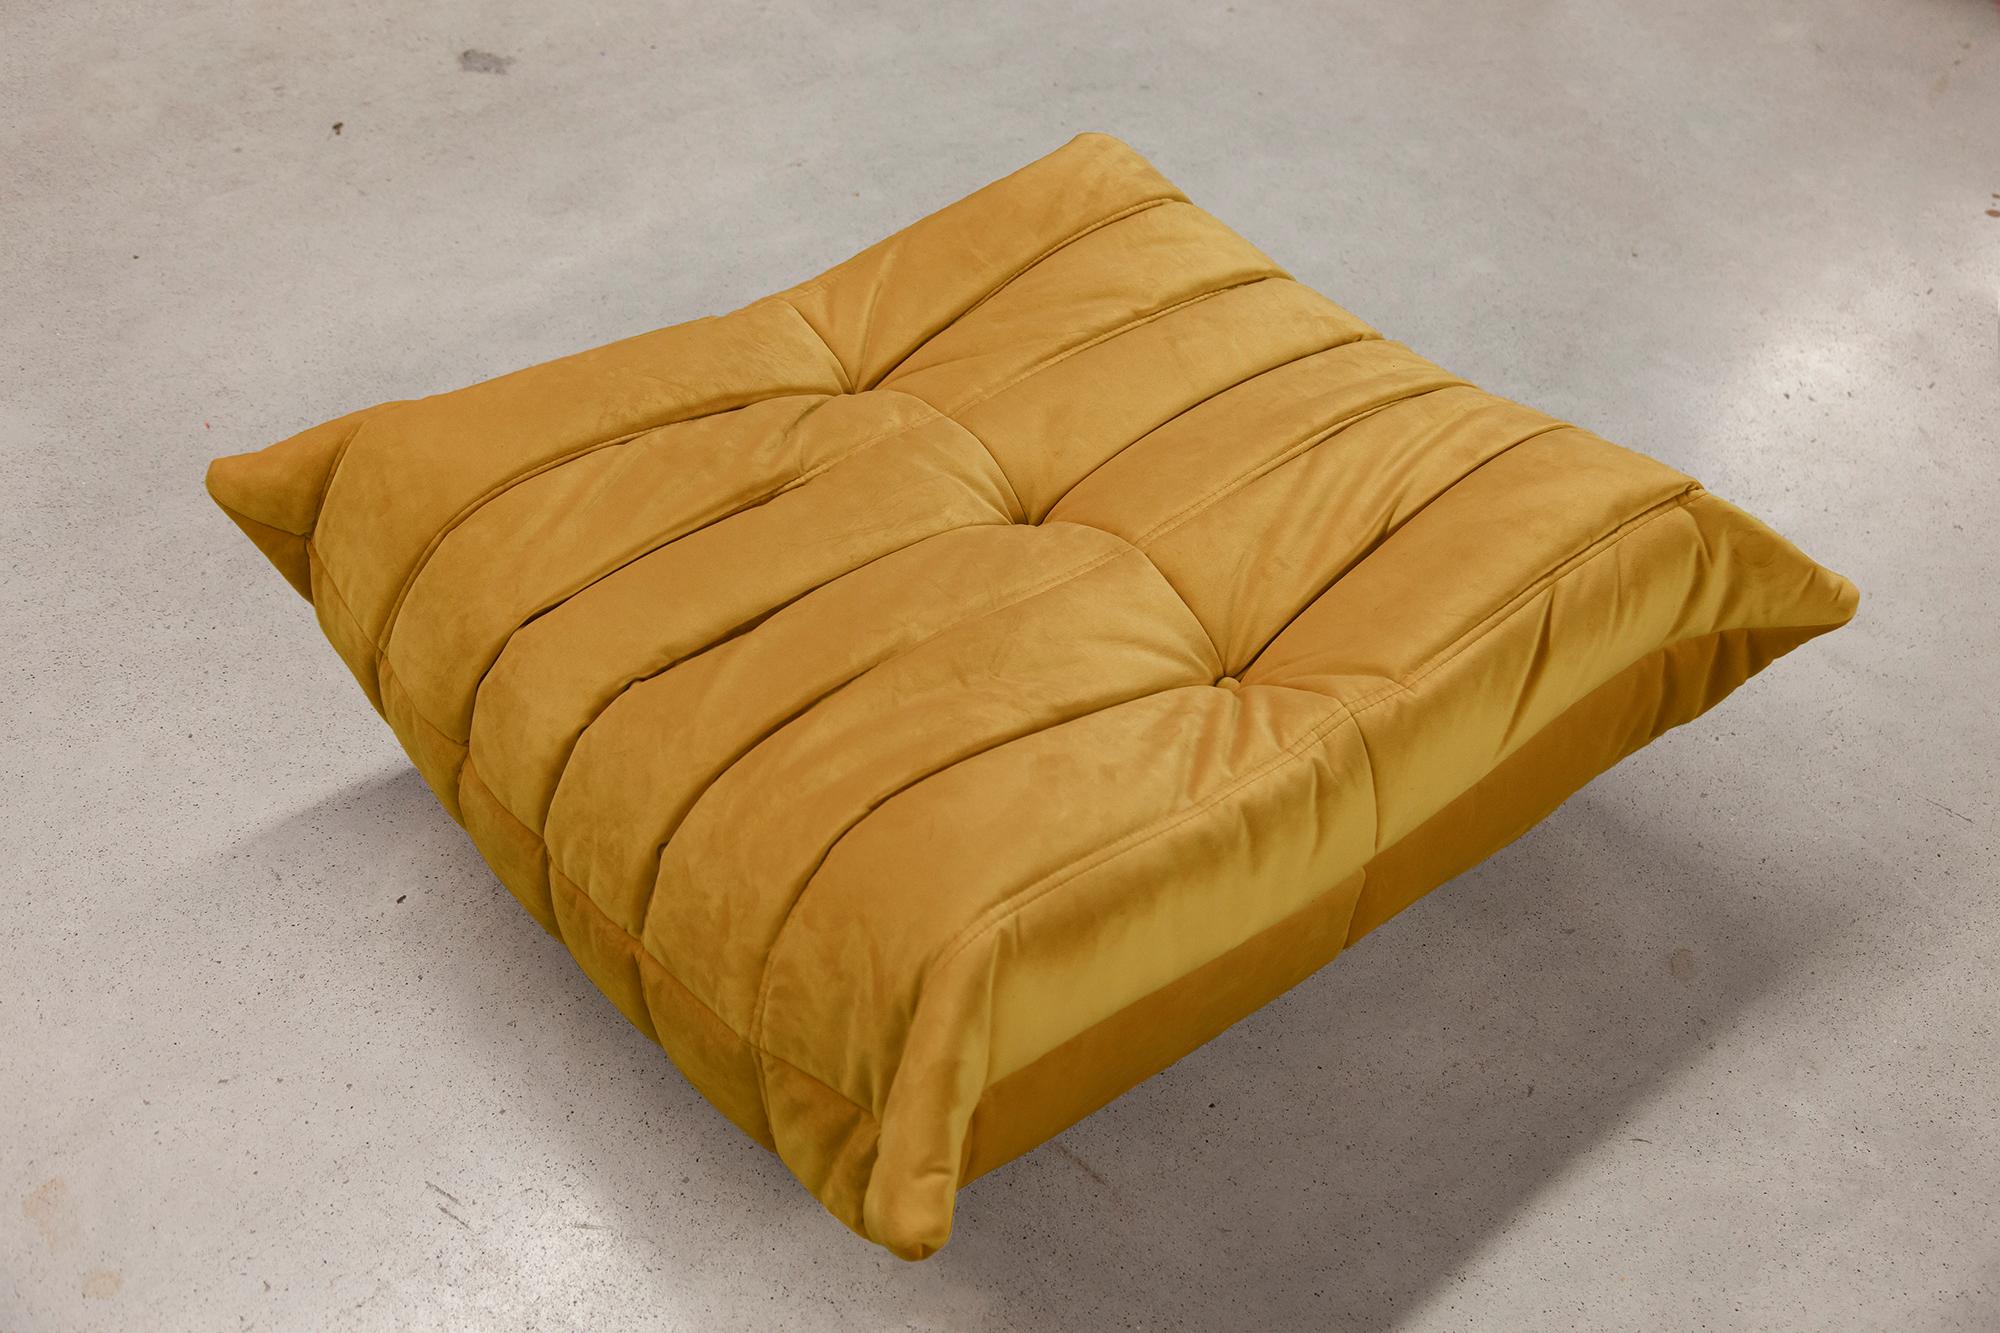 This Togo ottoman was designed by Michel Ducaroy in 1973 and was manufactured by Ligne Roset in France. It has been reupholstered in new golden yellow velvet (87 x 80 x 38 cm). It has the original Ligne Roset logo and genuine Ligne Roset bottom.